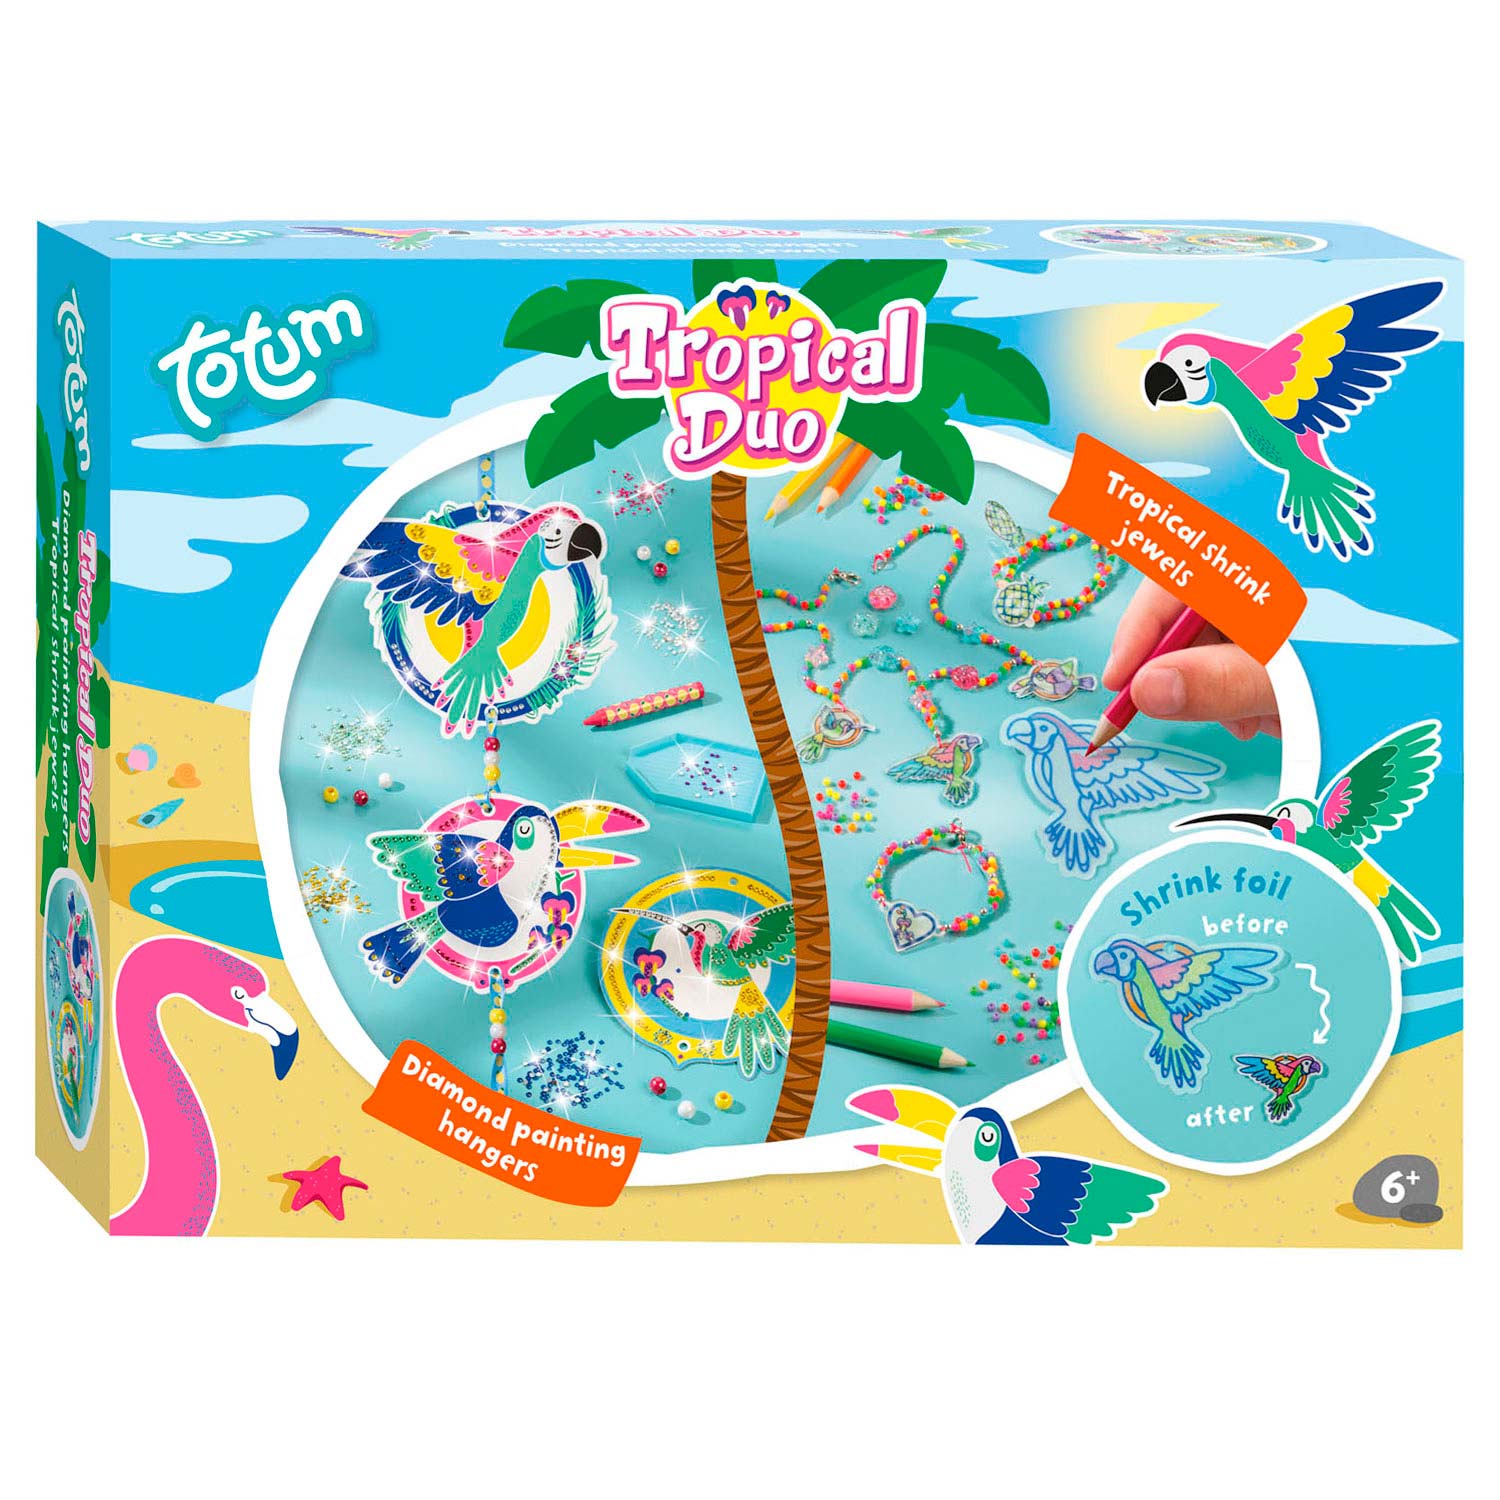 Totum Tropical Duo Knutselset, 2in1